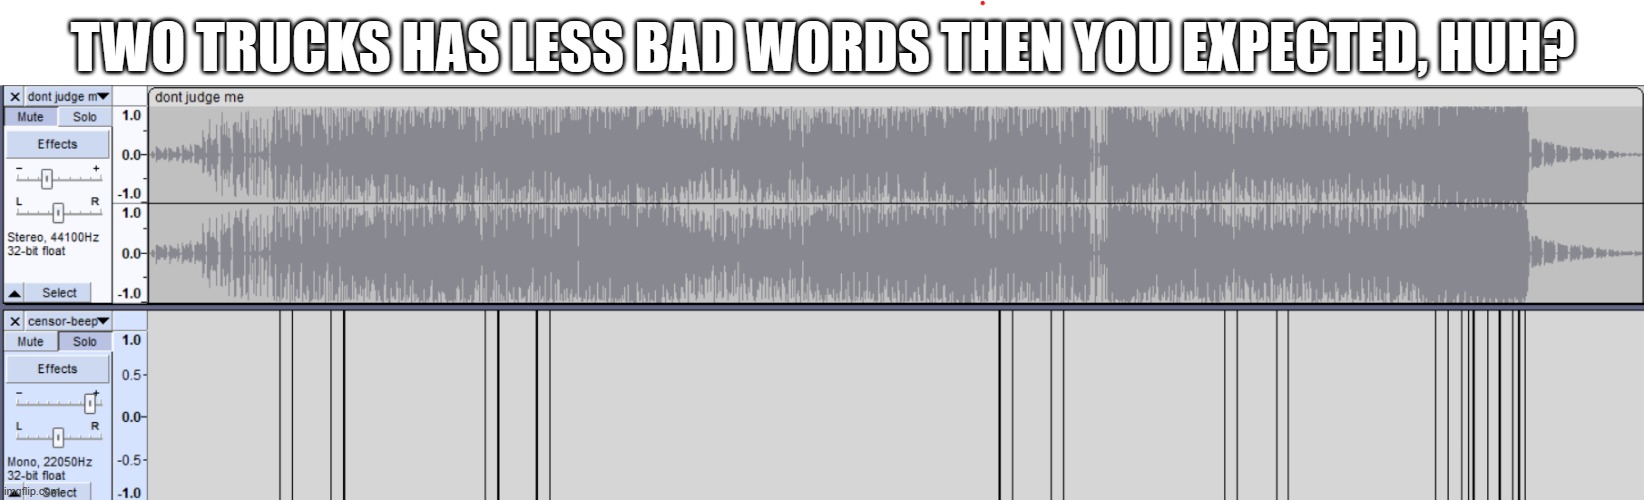 less bad words then you think | TWO TRUCKS HAS LESS BAD WORDS THEN YOU EXPECTED, HUH? | image tagged in audacity,two trucks censored | made w/ Imgflip meme maker